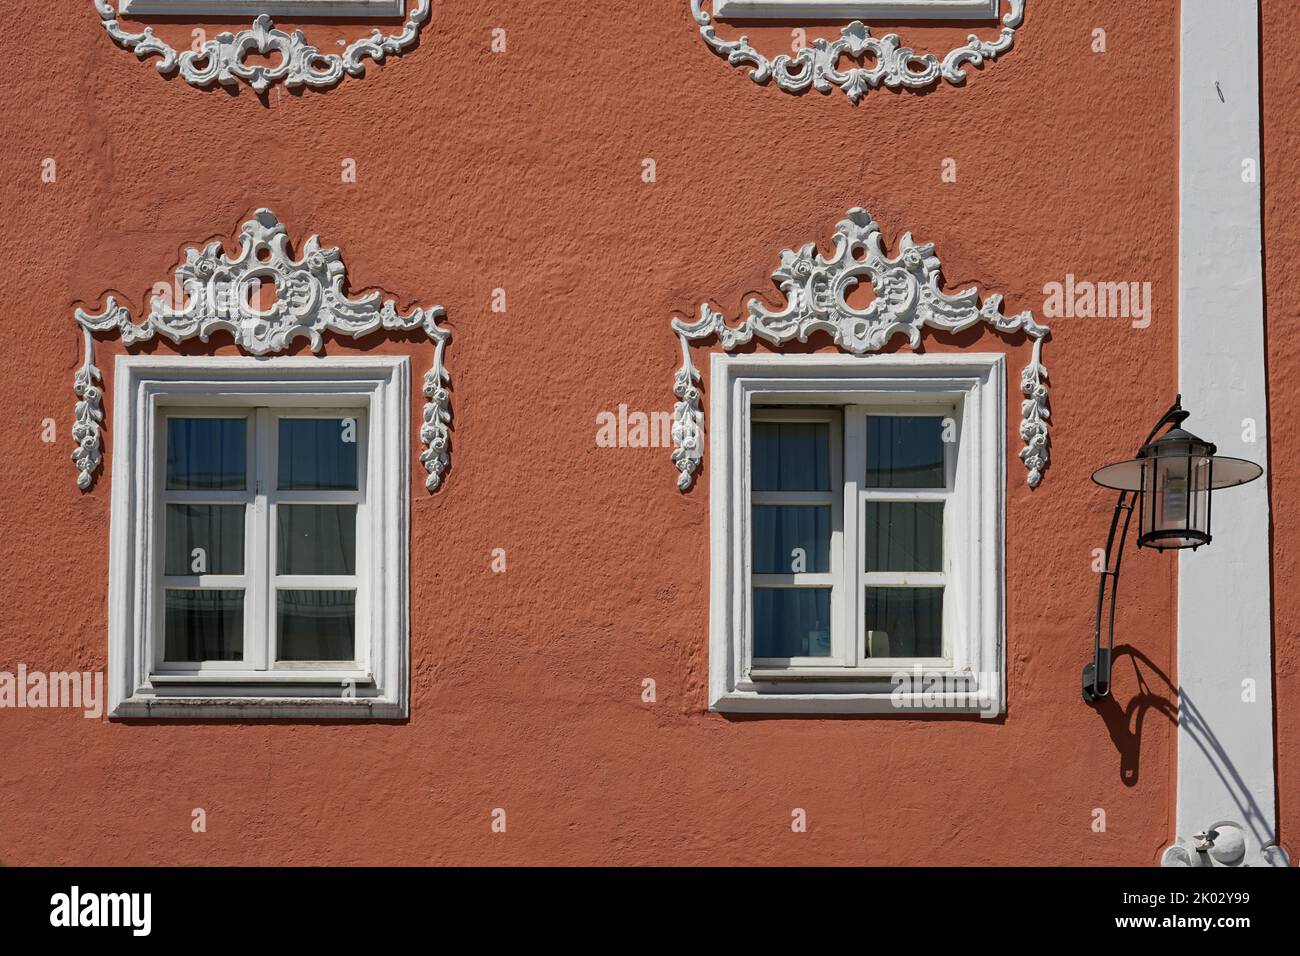 Germany, Bavaria, Upper Bavaria, Traunstein County, Waging am See, market place, red house facade, muntin windows, ornaments, detail Stock Photo